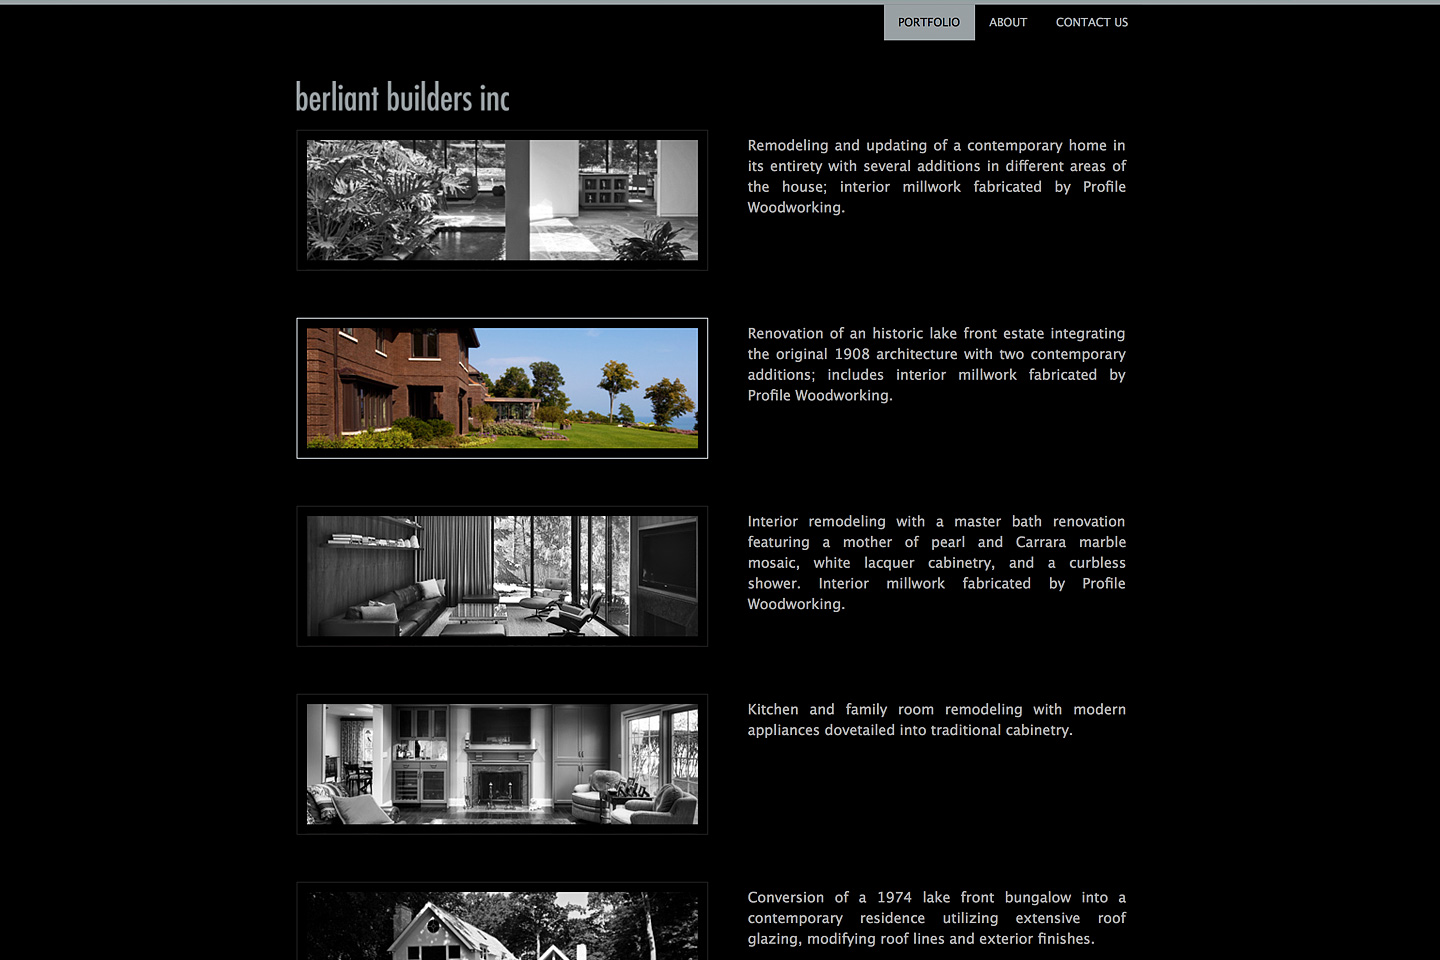 a screen capture of the portfolio page, featuring selected projects completed by berliant builders